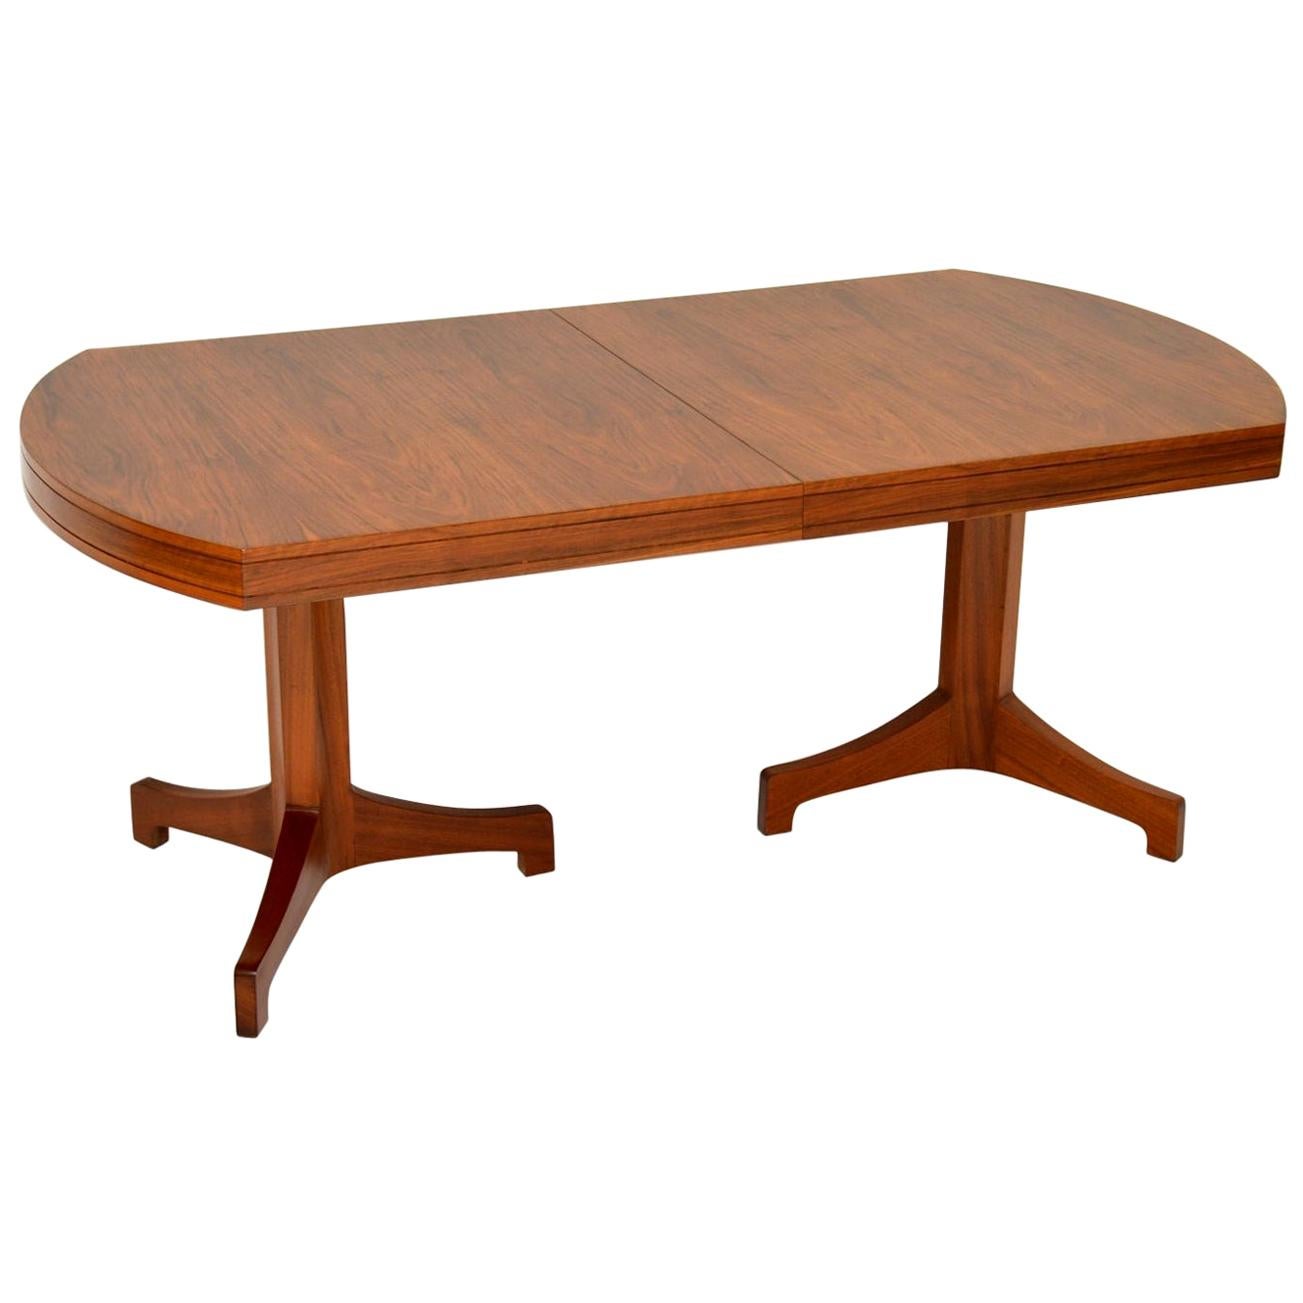 A magnificent and extremely rare vintage extending dining table in Walnut, this dates from the 1960s. The previous owner who had it from new was adamant that this was a Robert Heritage design for Archie Shine. This may or may not be the case, the